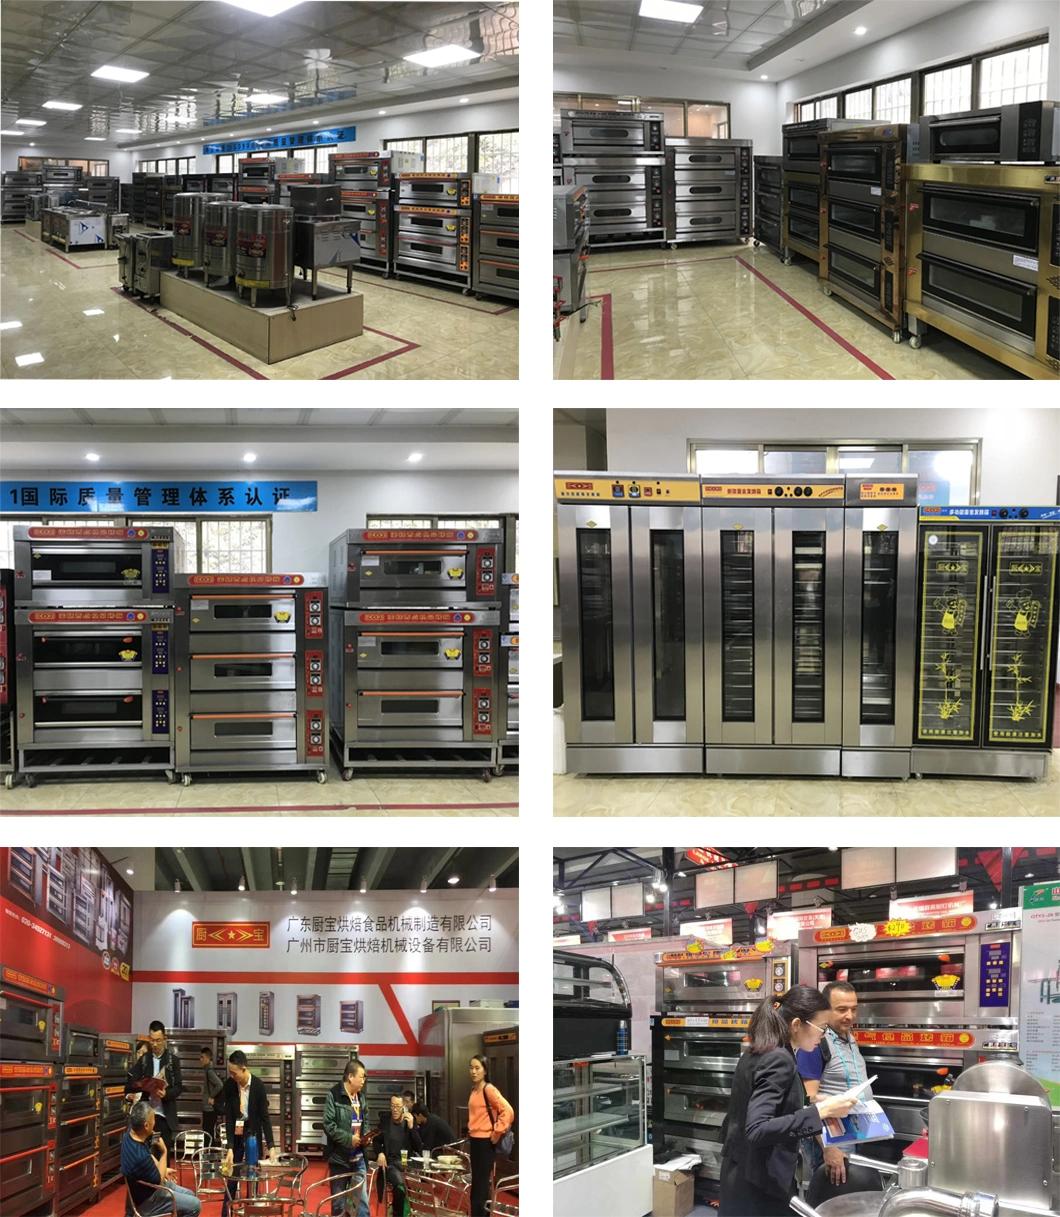 Commercial Kitchen 1 Deck 2 Trays Gas Oven for Baking Equipment Bakery Machine Food Equipment